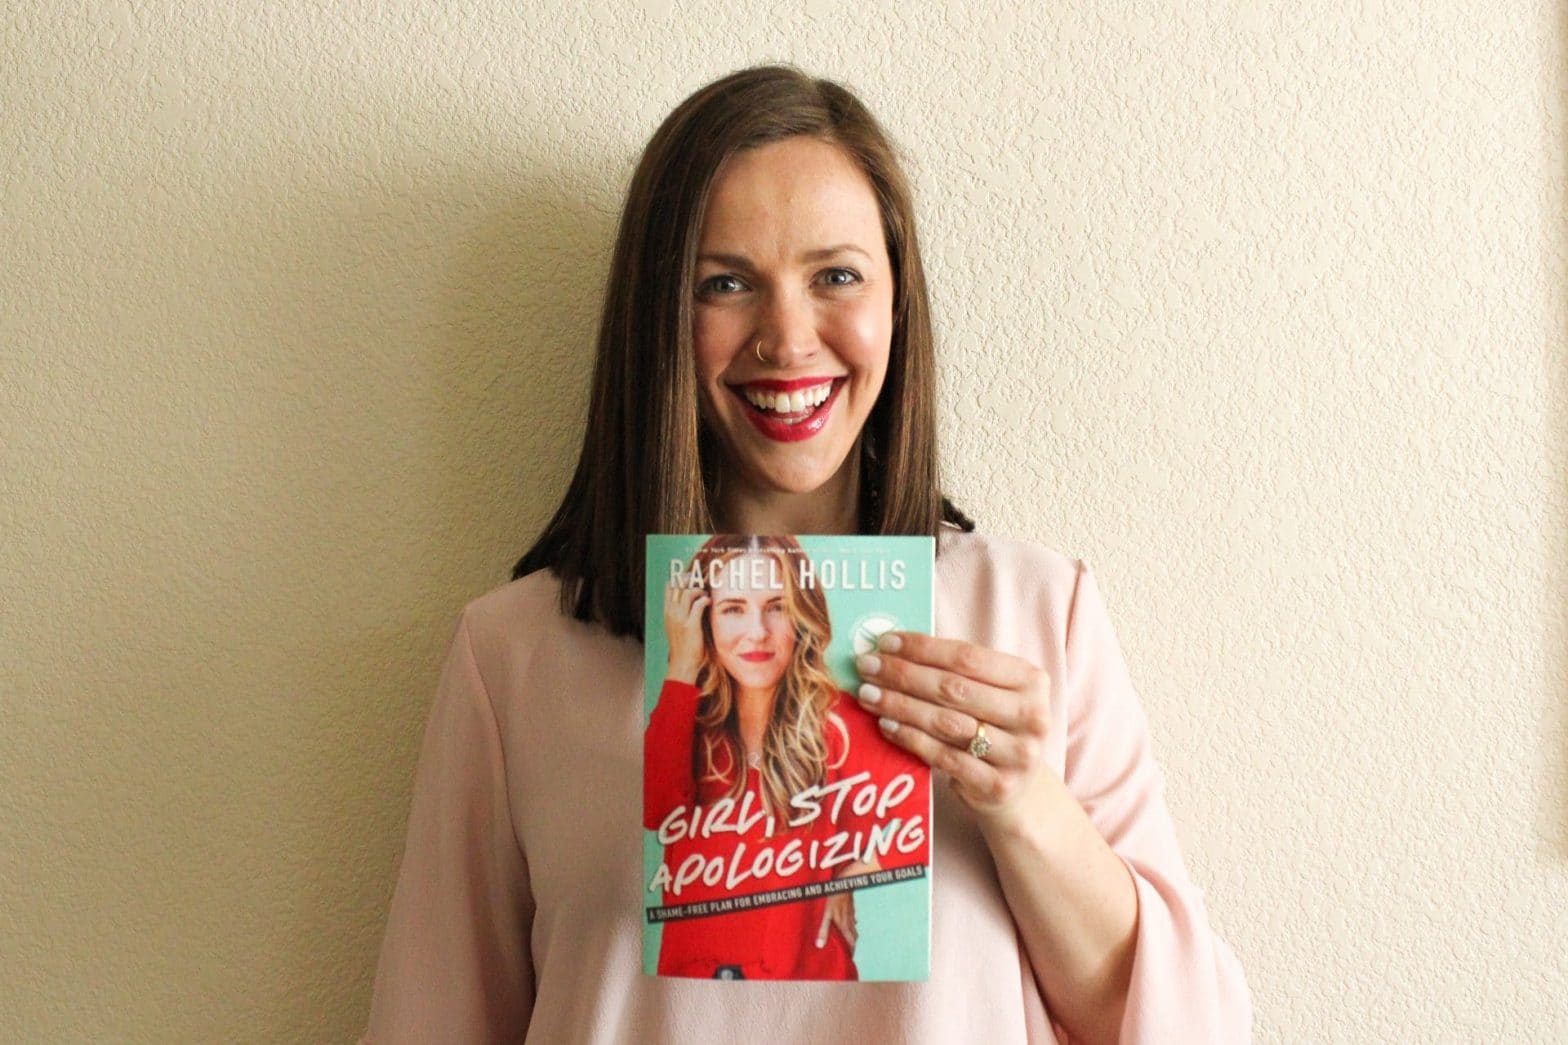 “Girl, Stop Apologizing” Review – a book by Rachel Hollis